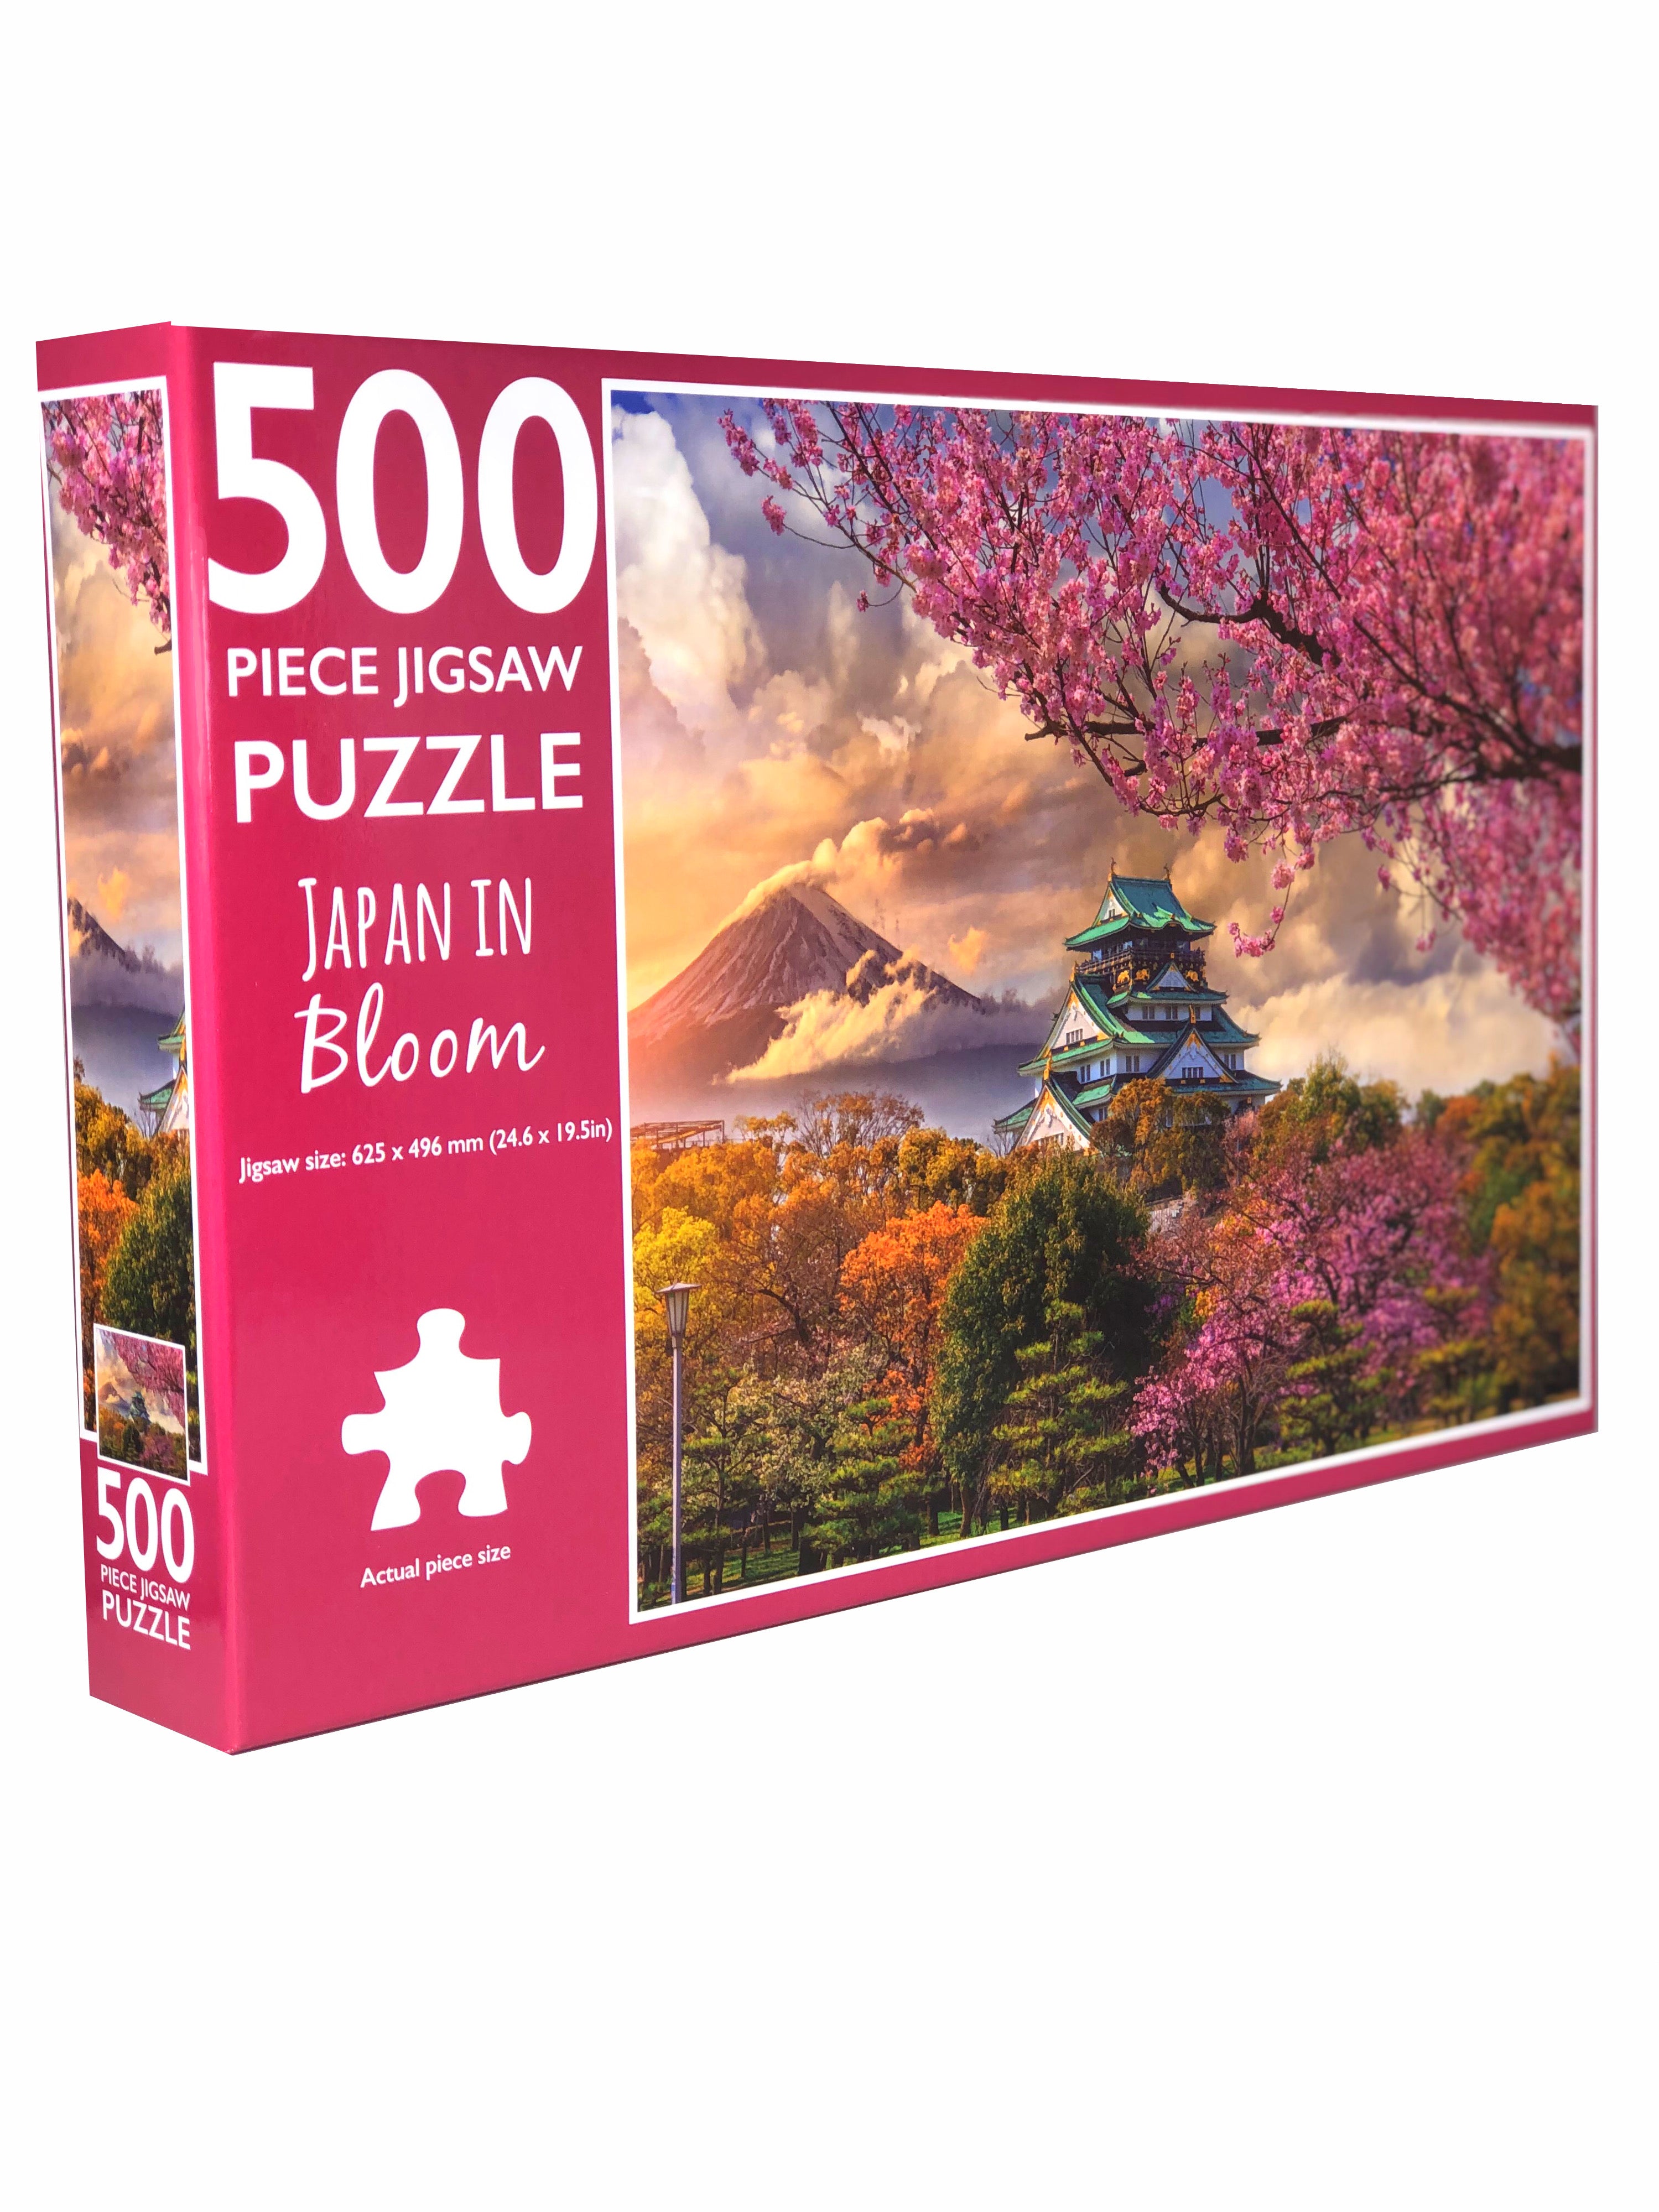 Japan in Bloom 500 Piece Jigsaw Puzzle